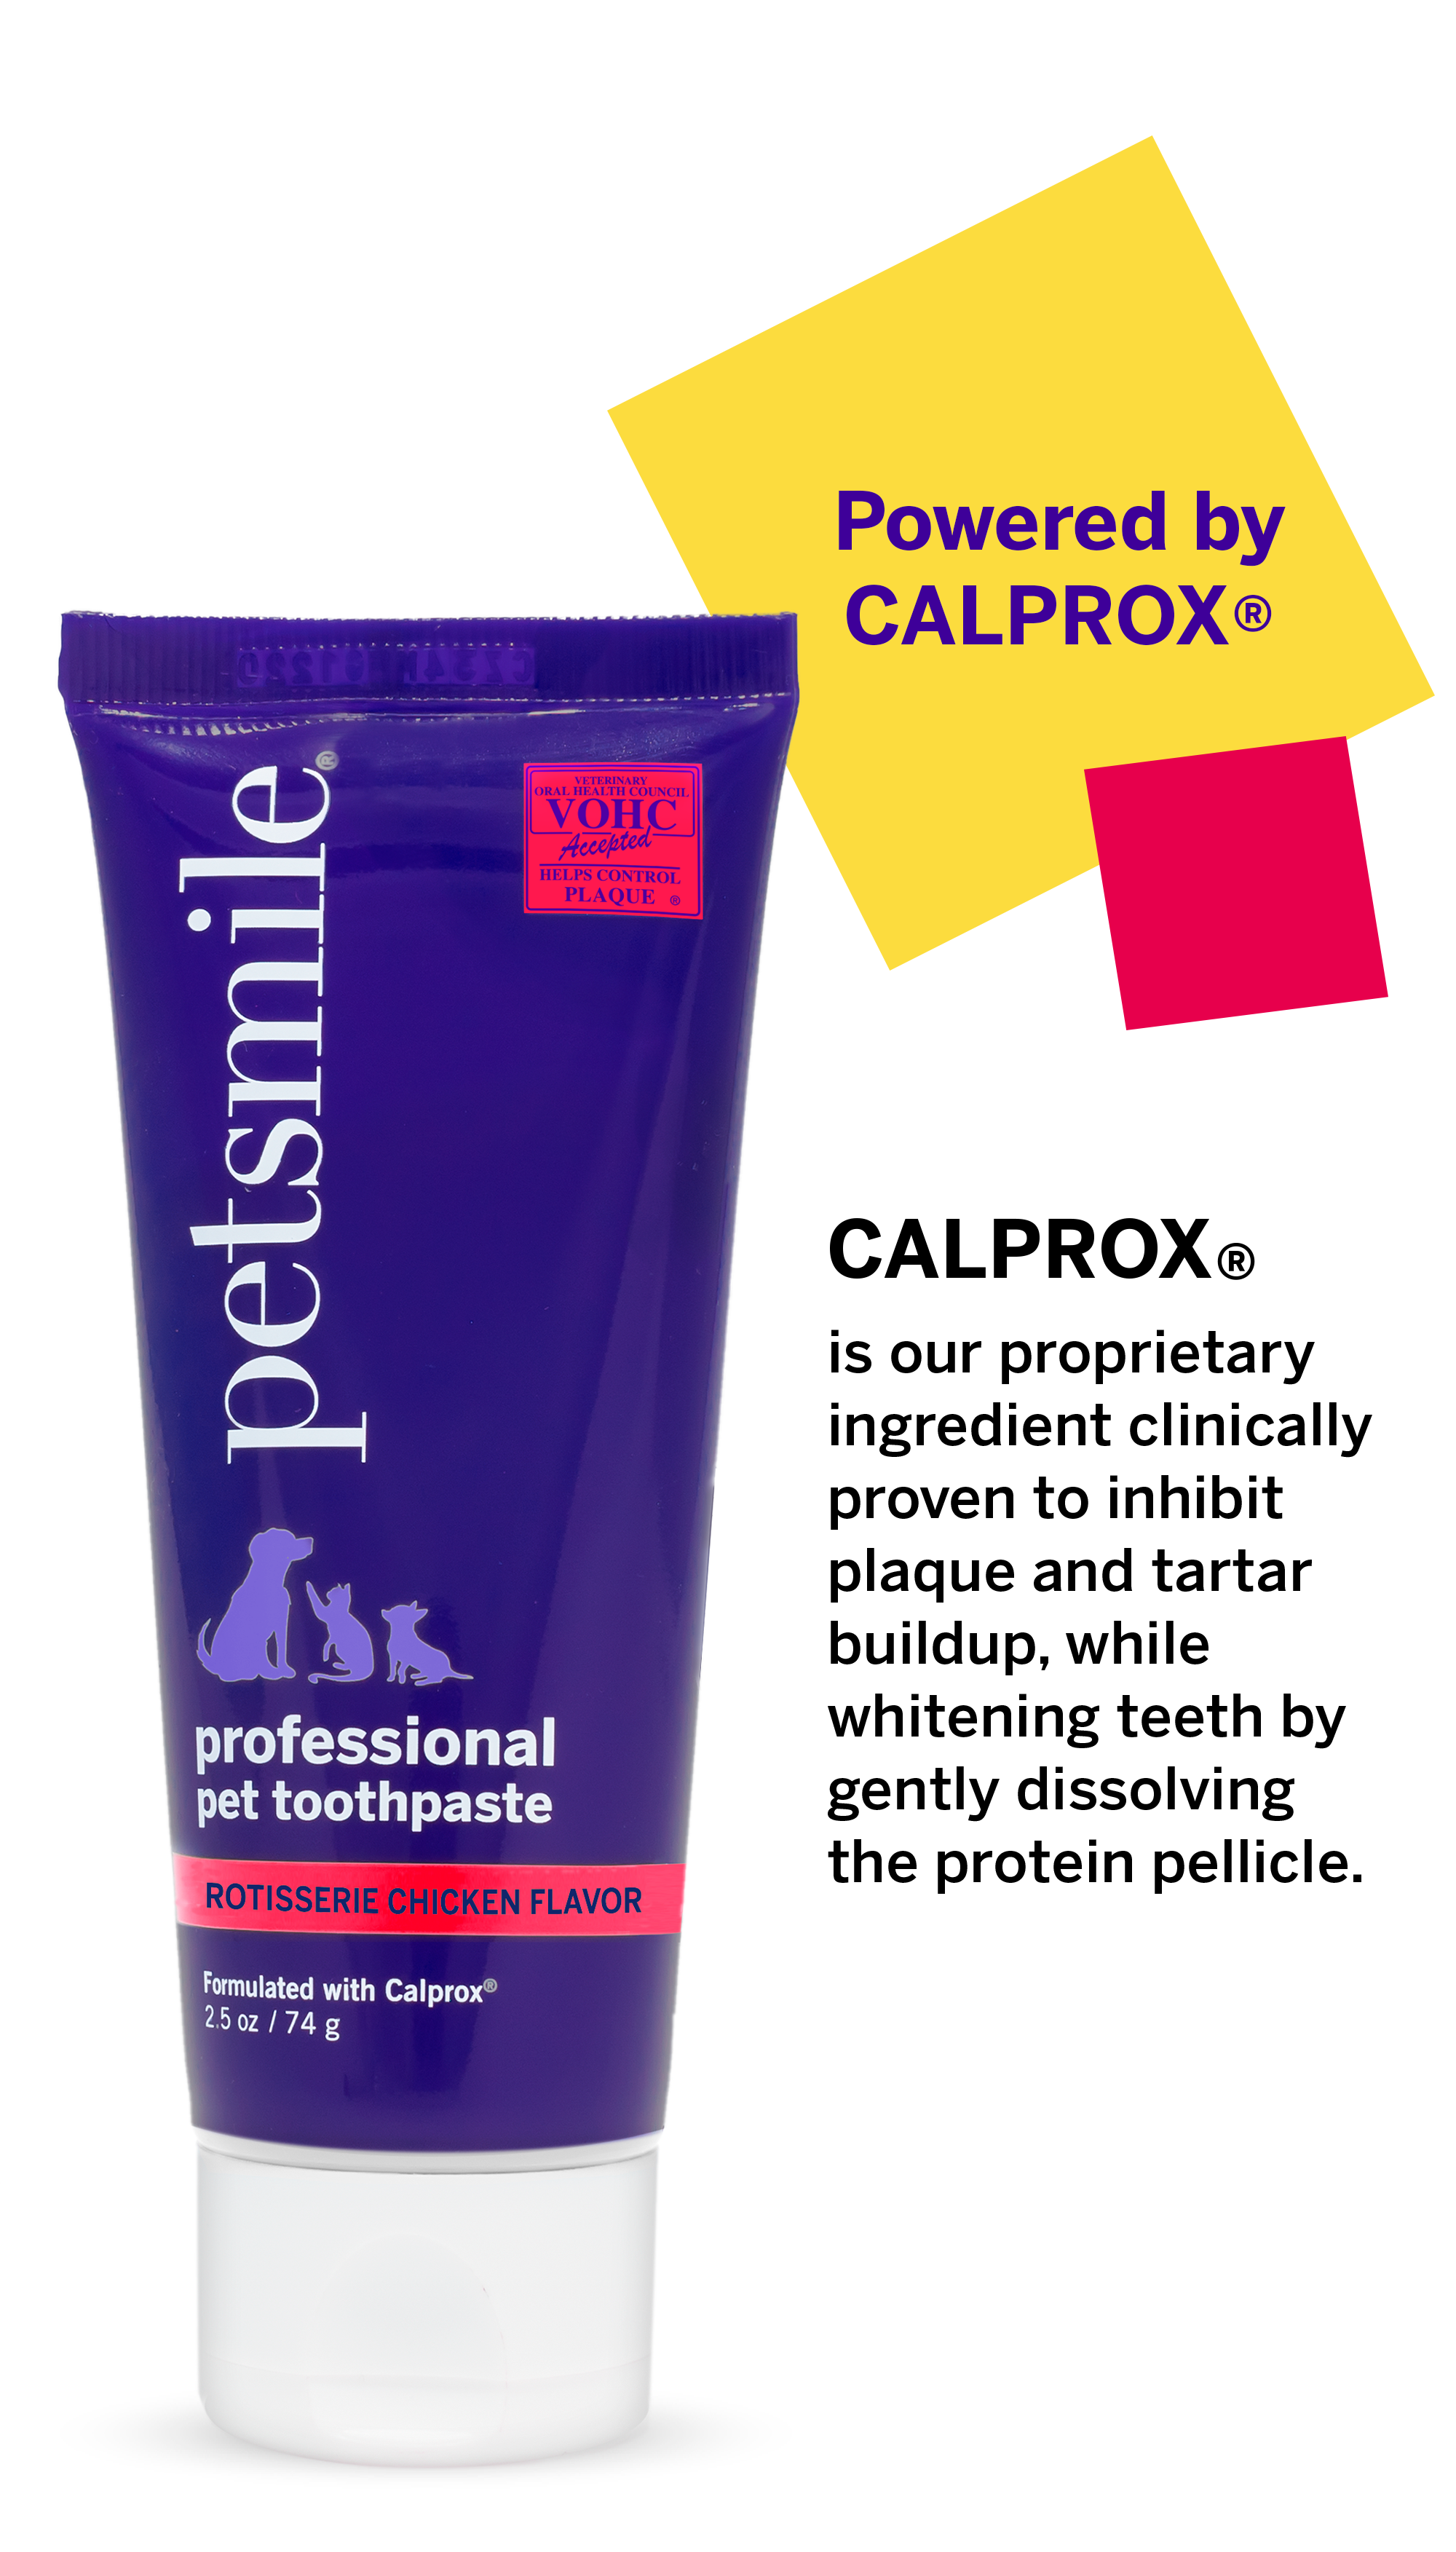 small petsmile toothpaste with Calprox , small puruple tube of chicken toothpaste , 2.5 OZ of petsmile professional pet toothpaste , Vegan-friendly, cruelty-free-product , Chicken Flavor, powerd by calprox , Fresh breath, VOHC sealed.